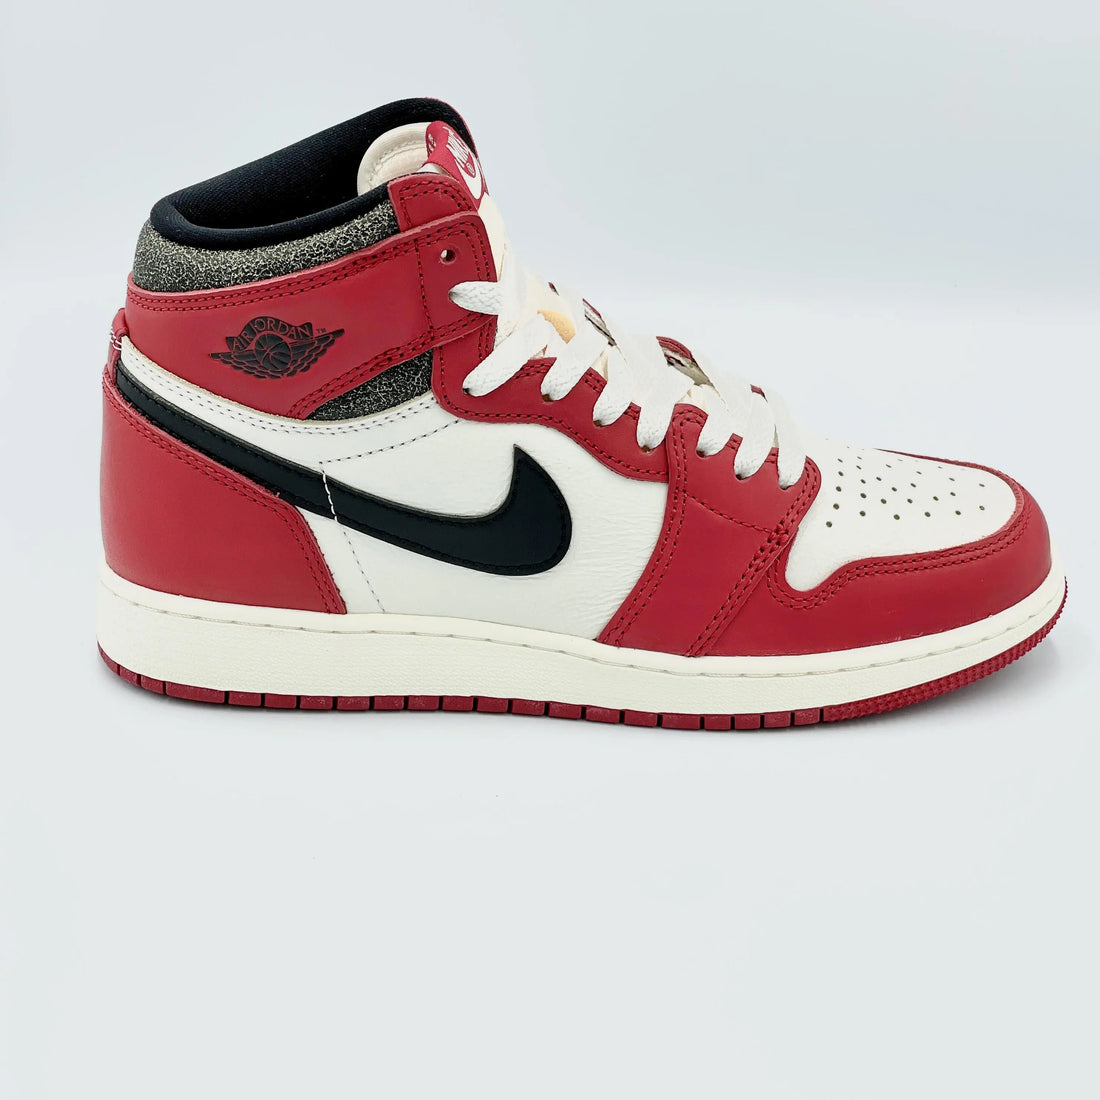 Jordan 1 Retro High OG Chicago Lost and Found  SA Sneakers